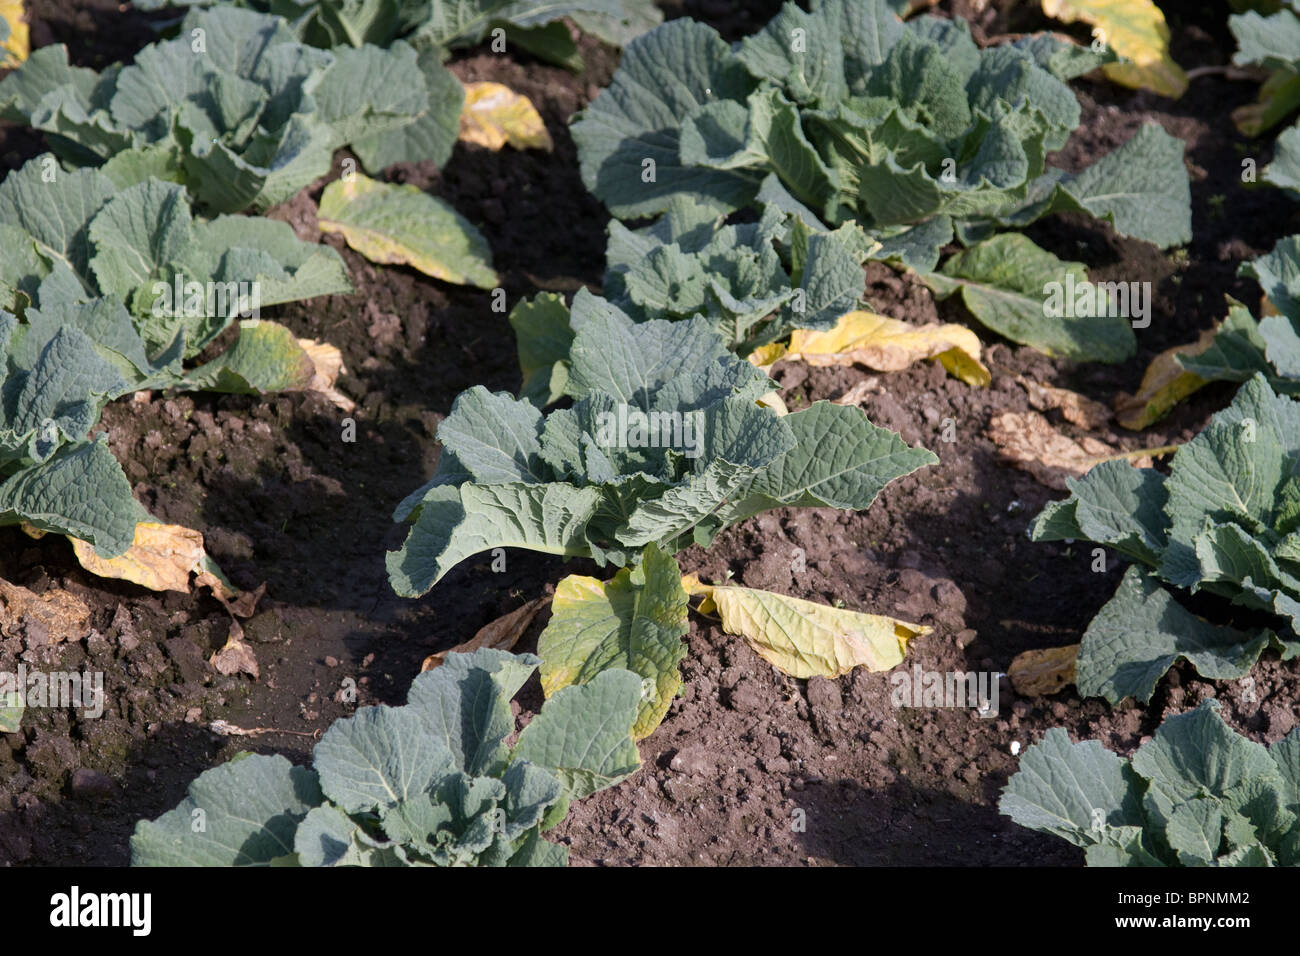 Savoy Cabbage showing signs of Disease   Club Root or Phytomyxea. Stock Photo